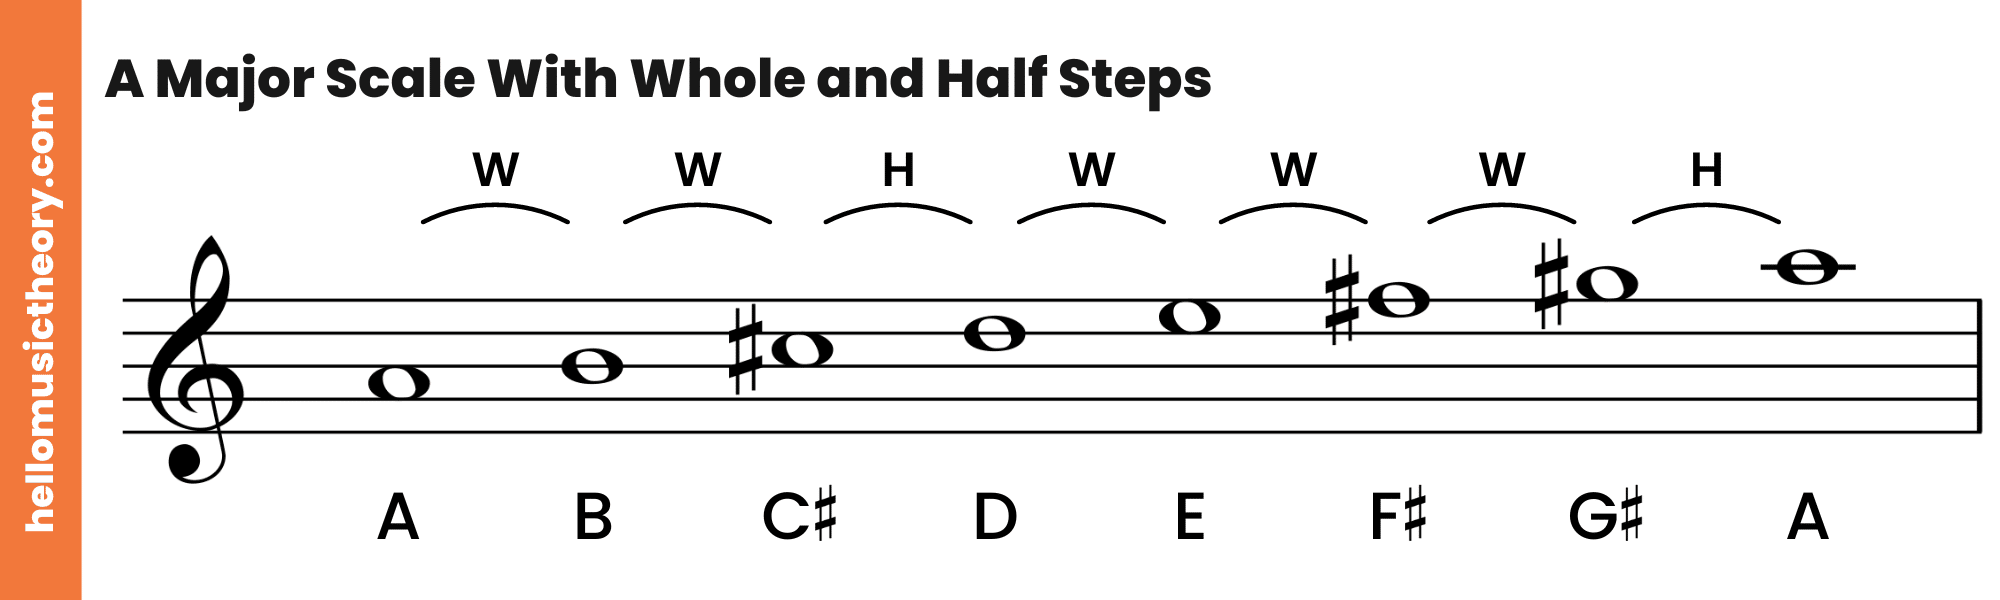 A Major Scale Treble Clef With Whole and Half Steps